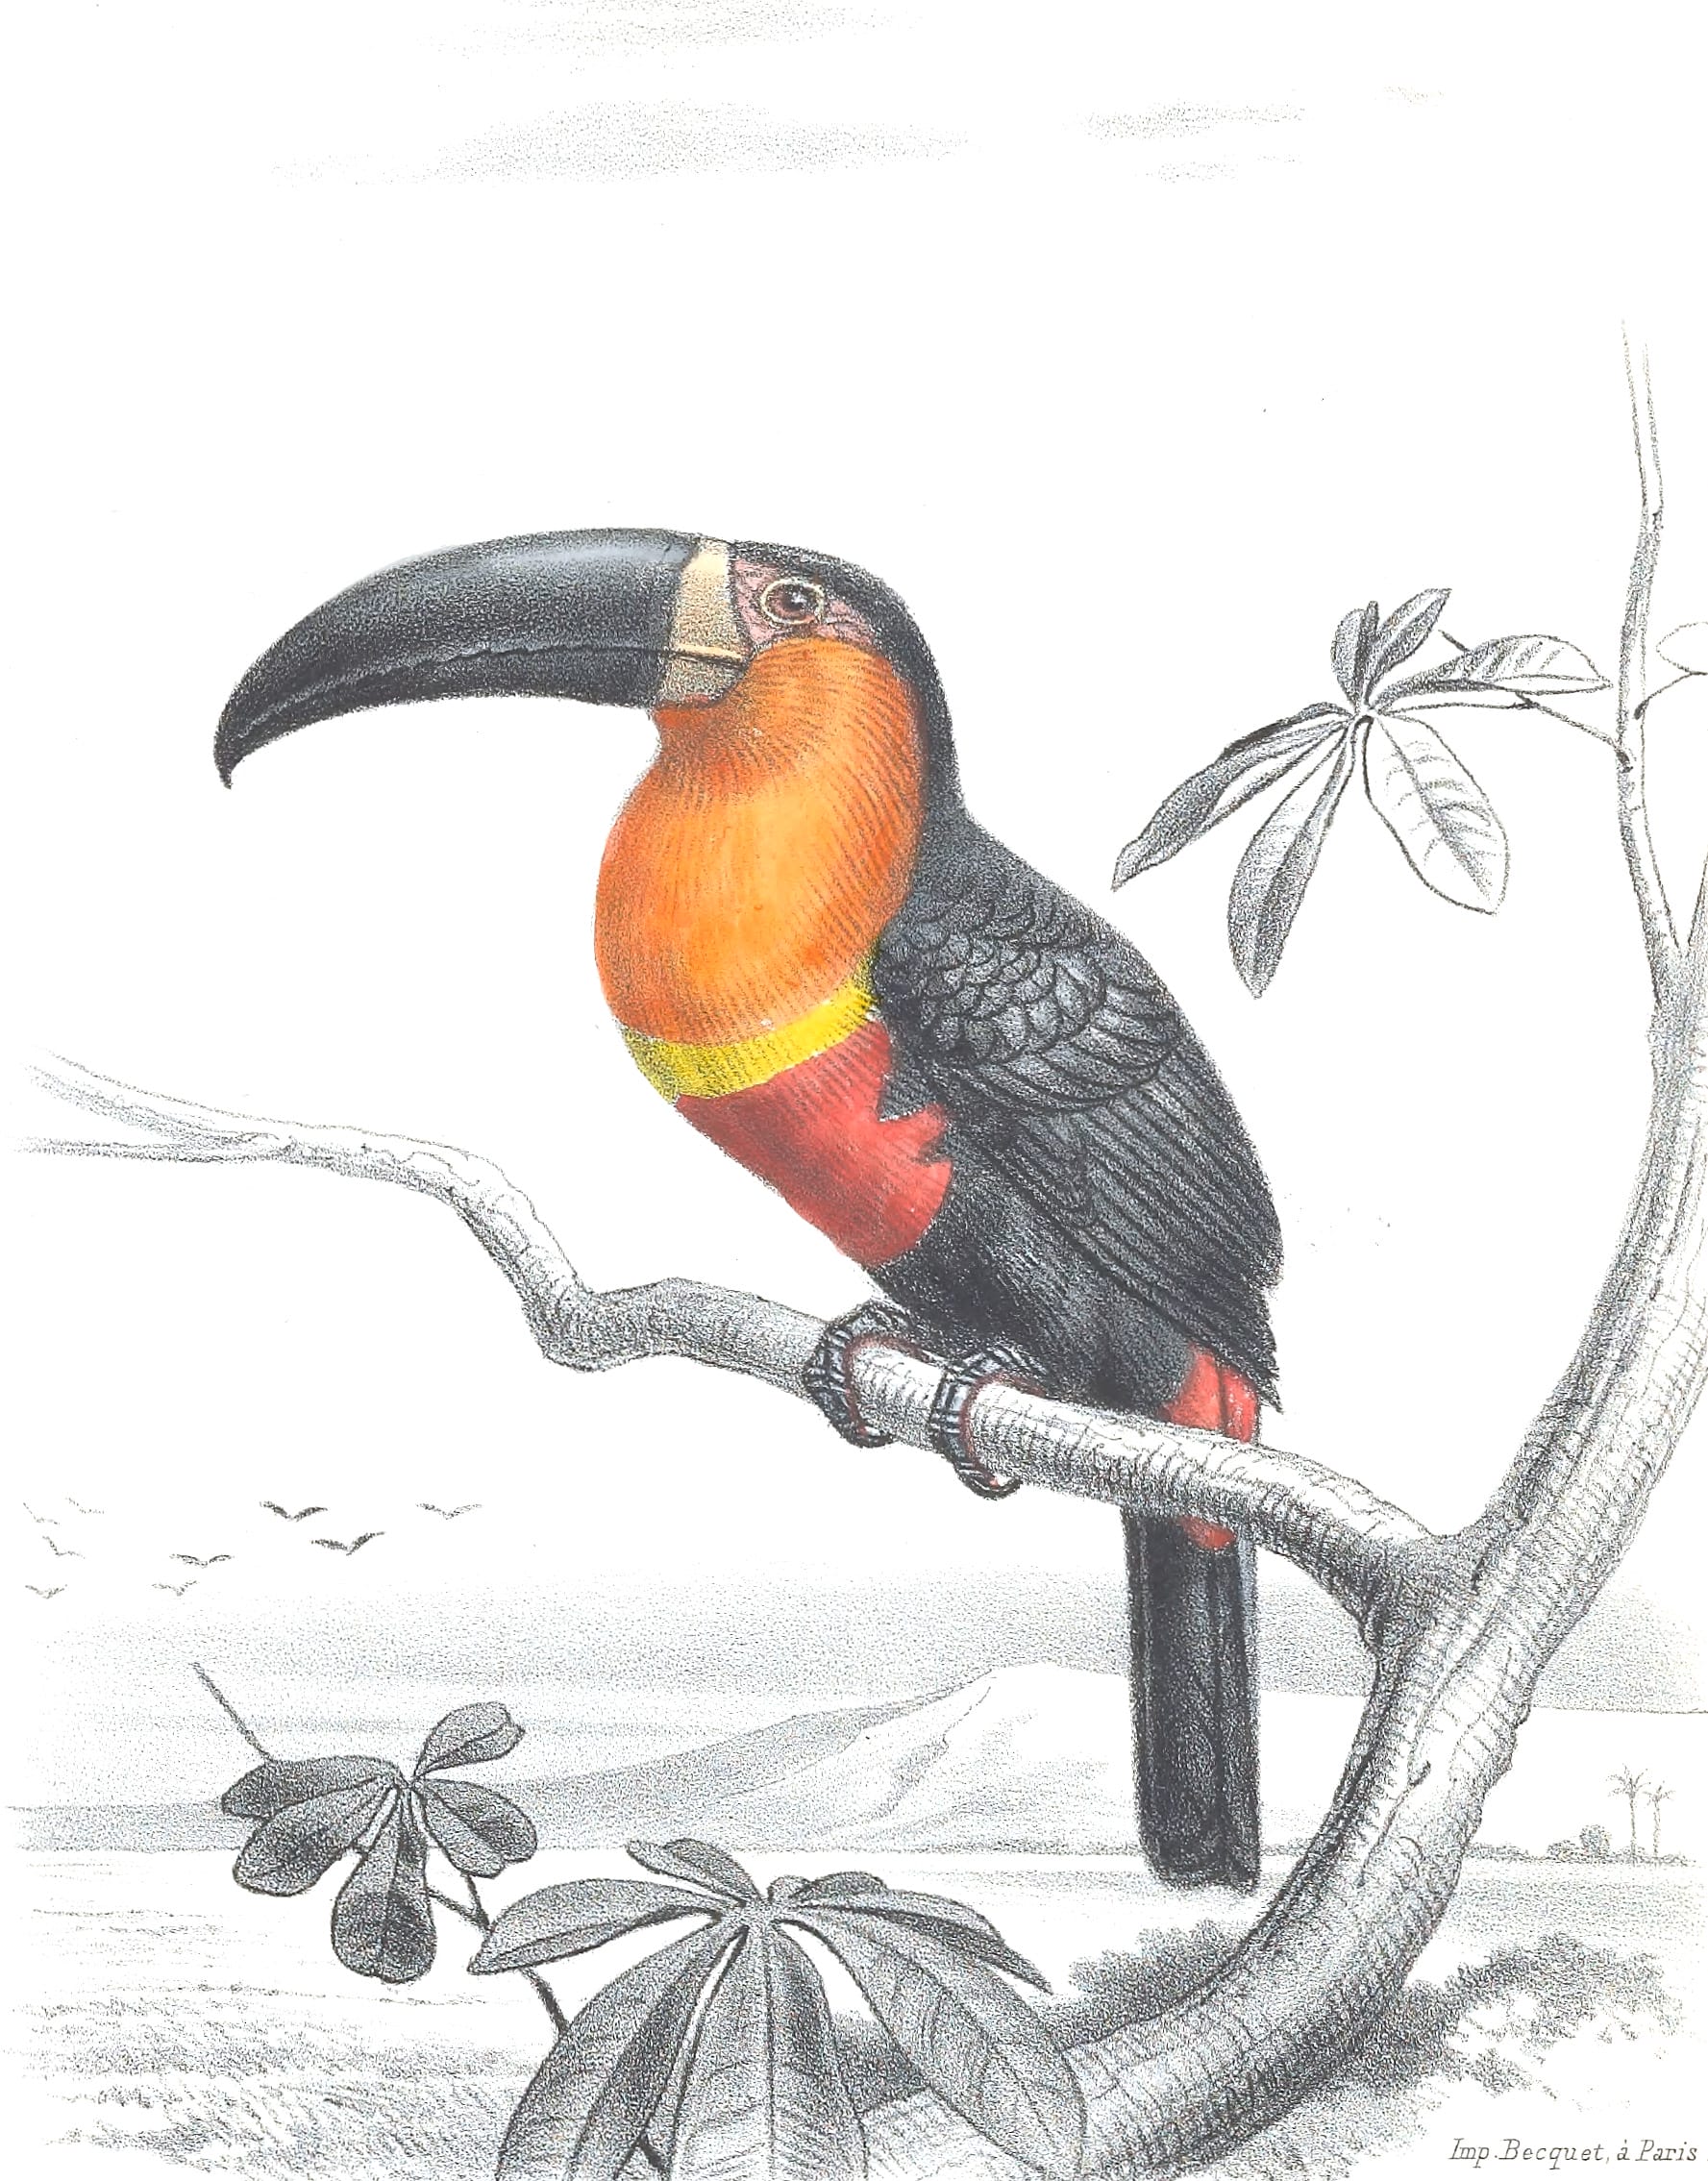 Antique Animal Illustration Of Toucan In The Public Domain - Free Vintage  Illustrations